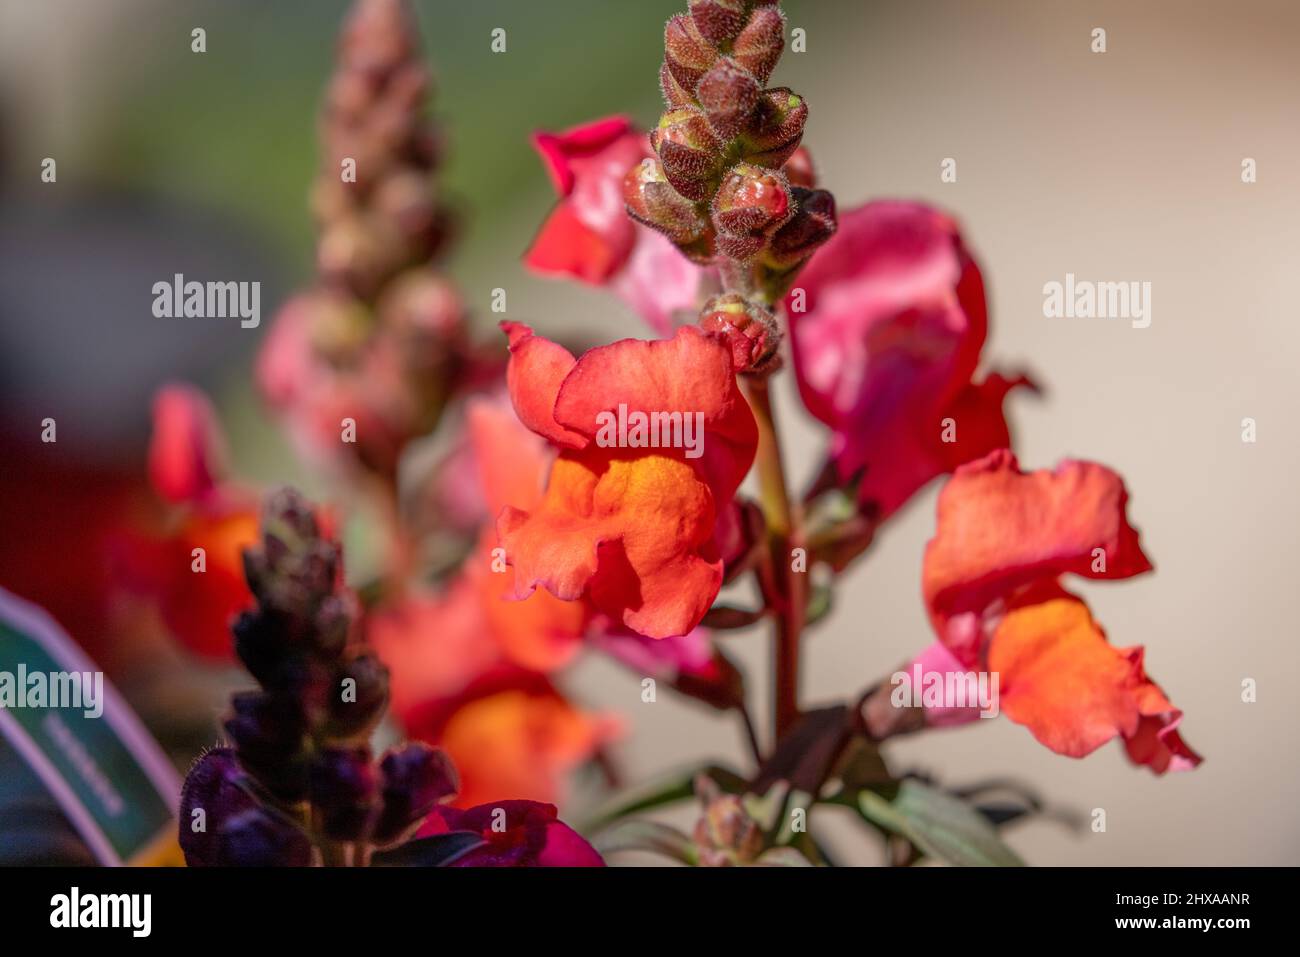 snapdragon flowers just beginning to bloom in summer Stock Photo